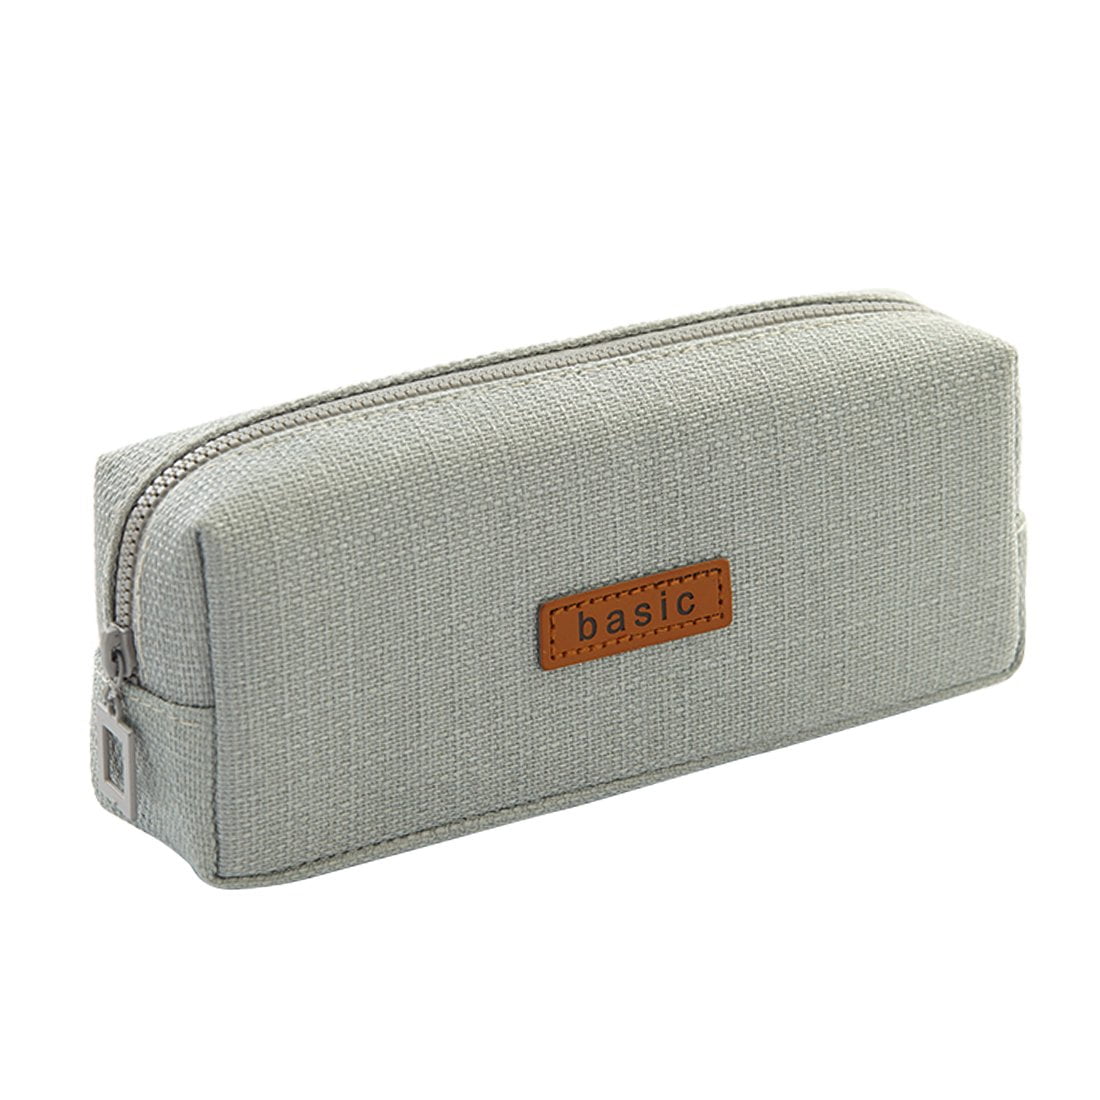 TureClos Pencil Bag Large Capacity Pencils Case Pouch Holder Cotton Linen  Zipper Closure Stationery Storage Bags Organizer for Office Dark Grey 